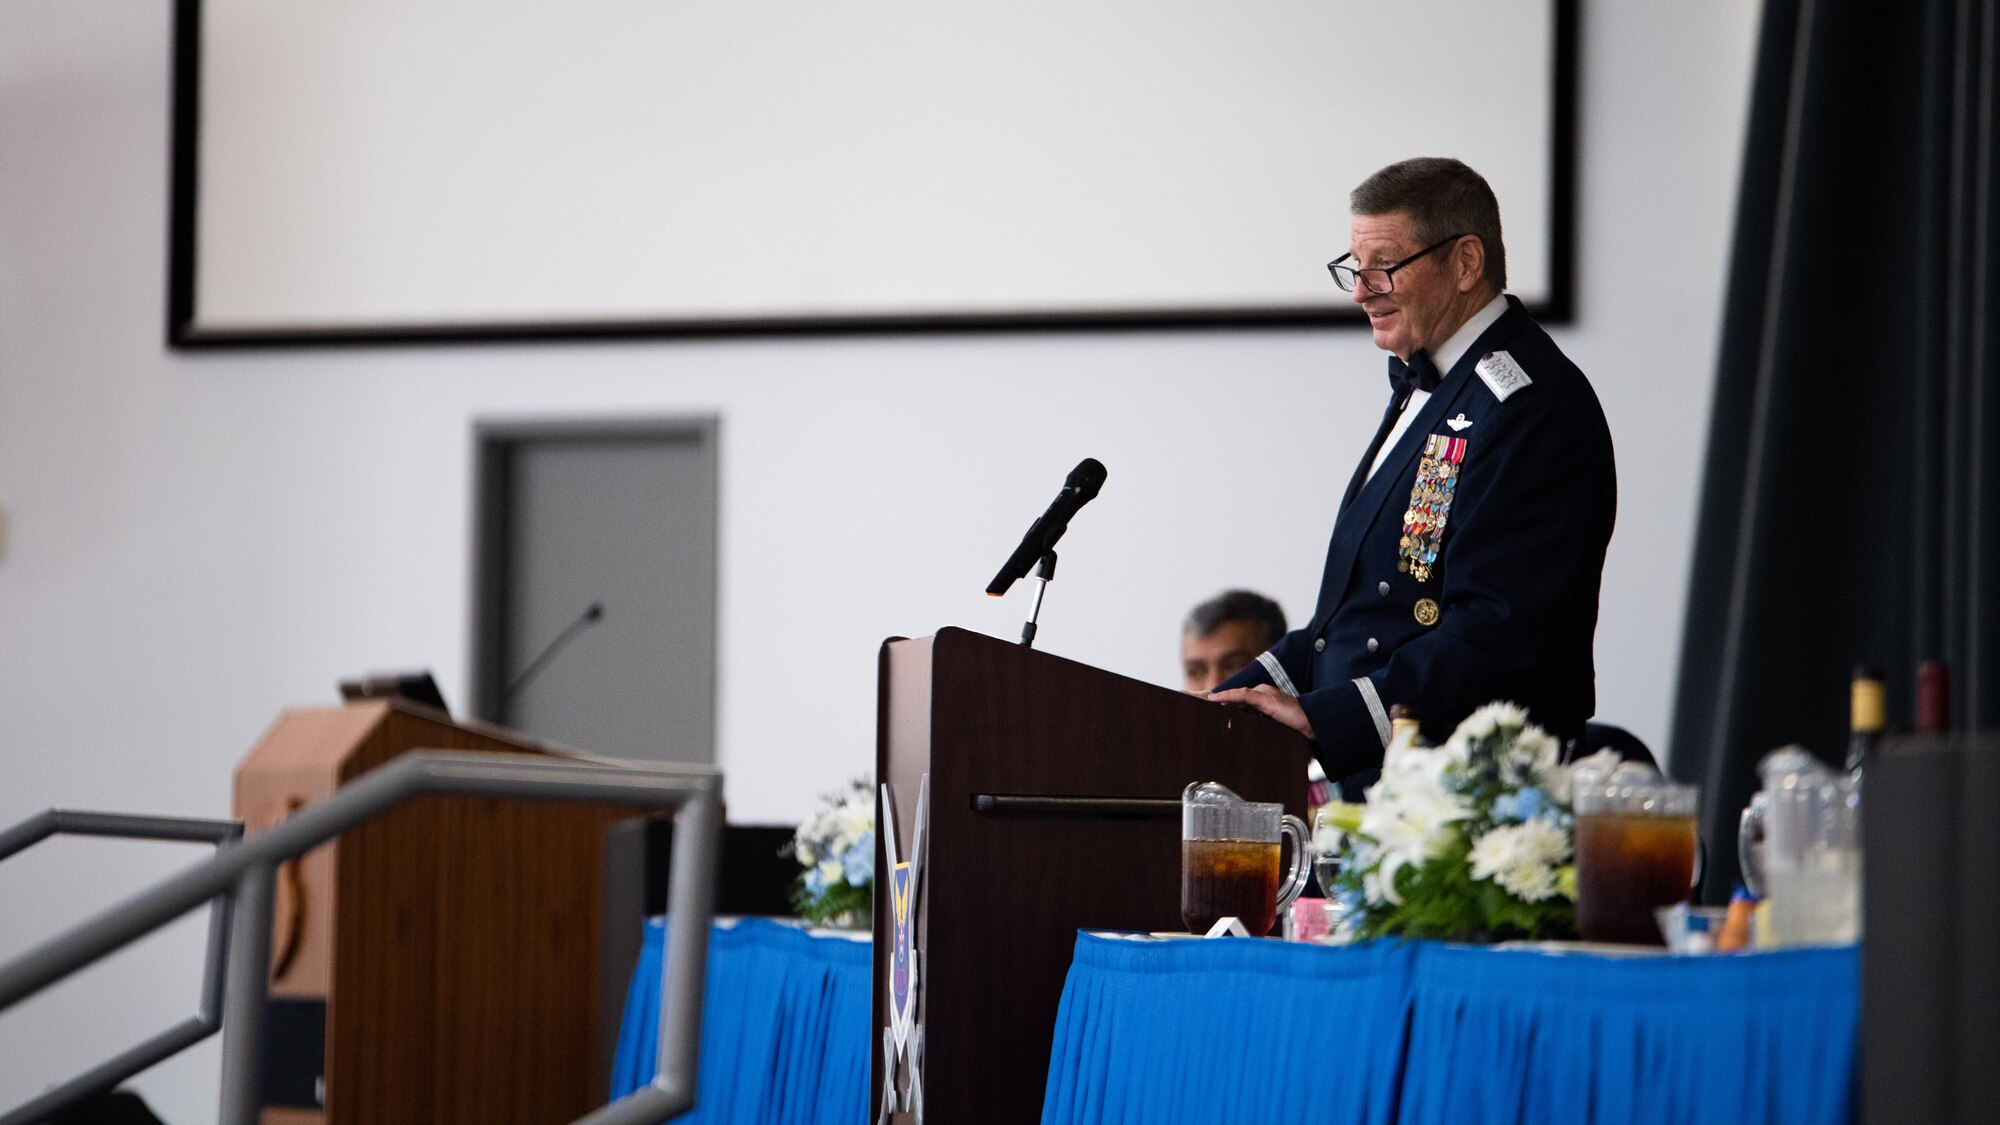 Retired Gen. Robin Rand, former Air Force Global Strike Command commander, makes remarks after being honored at an Order of the Sword ceremony at Barksdale Air Force Base, Louisiana, April 23, 2021. The Order of the Sword is a rare honor bestowed on a senior officer or civilian by the noncommissioned officers of a command to recognize individuals who have made significant contributions to the enlisted corps. (U.S. Air Force photo by Airman 1st Class Jacob B. Wrightsman)